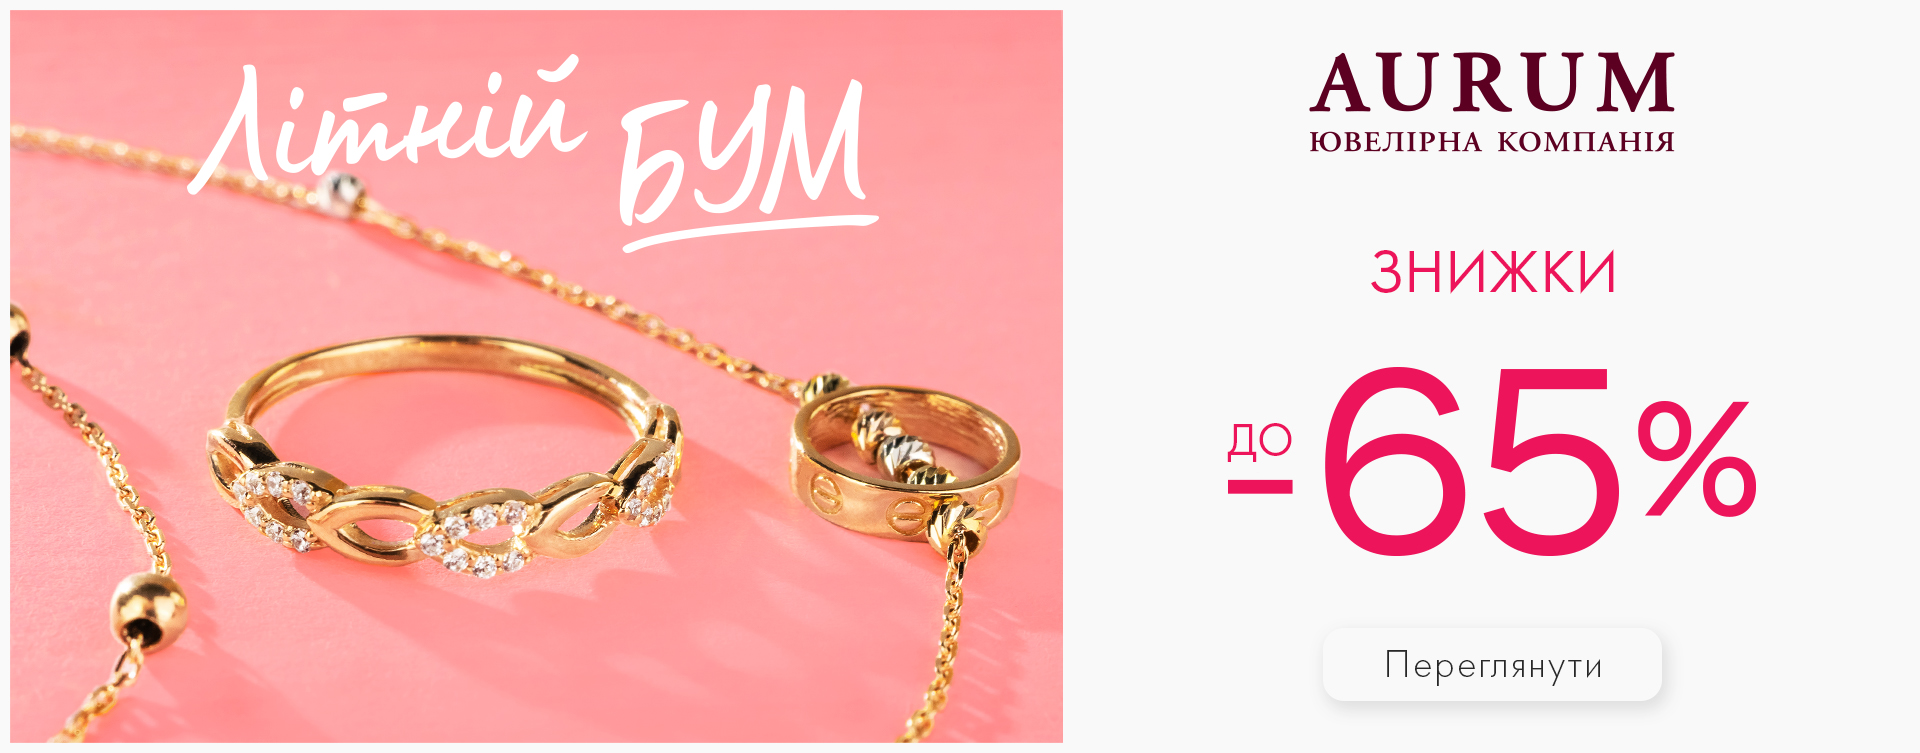 Discounts up to -65% on jewelry at AURUM